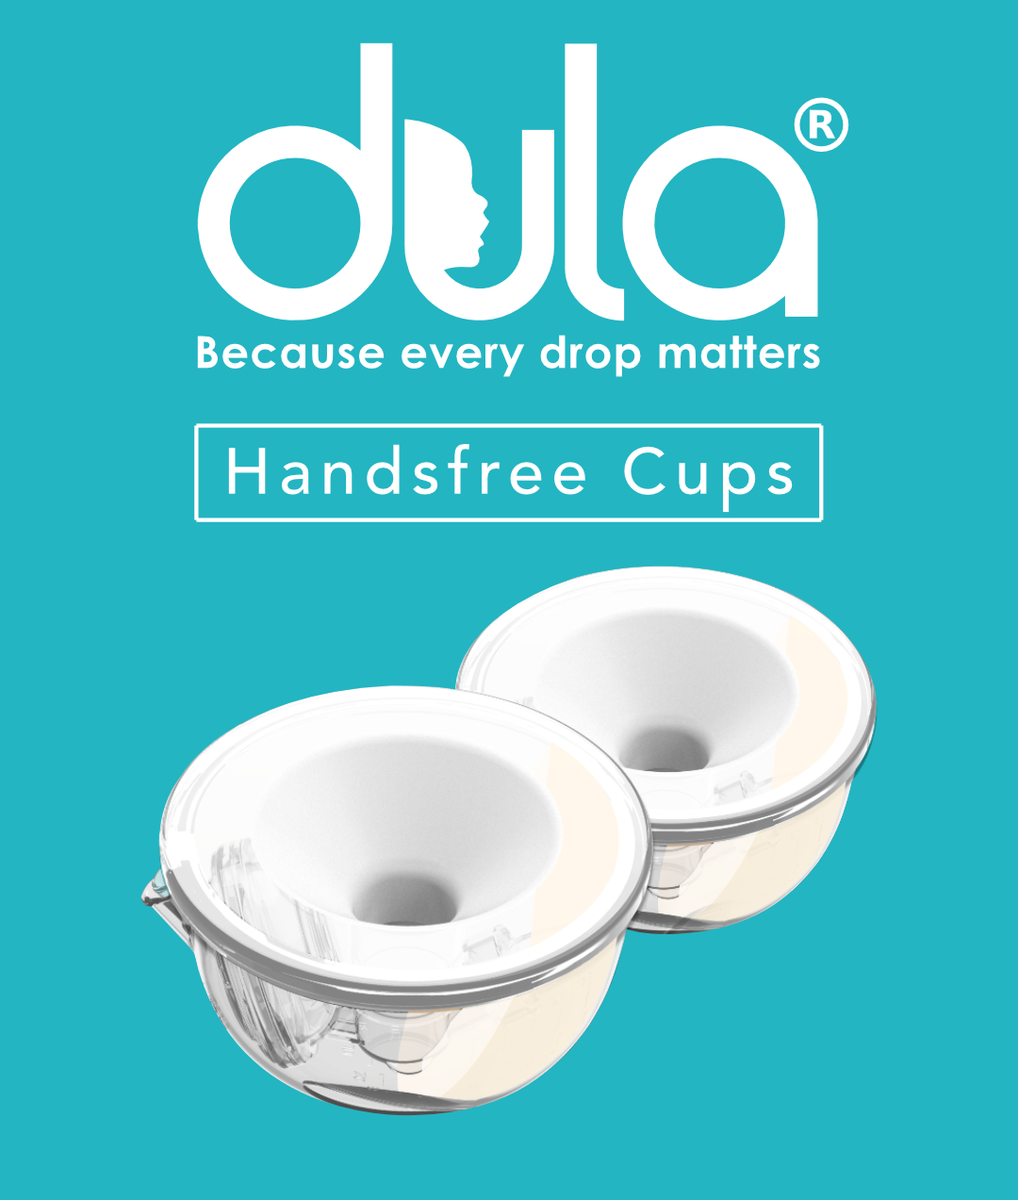 Youha Express Handsfree Collection Cups Set for Medela/Spectra